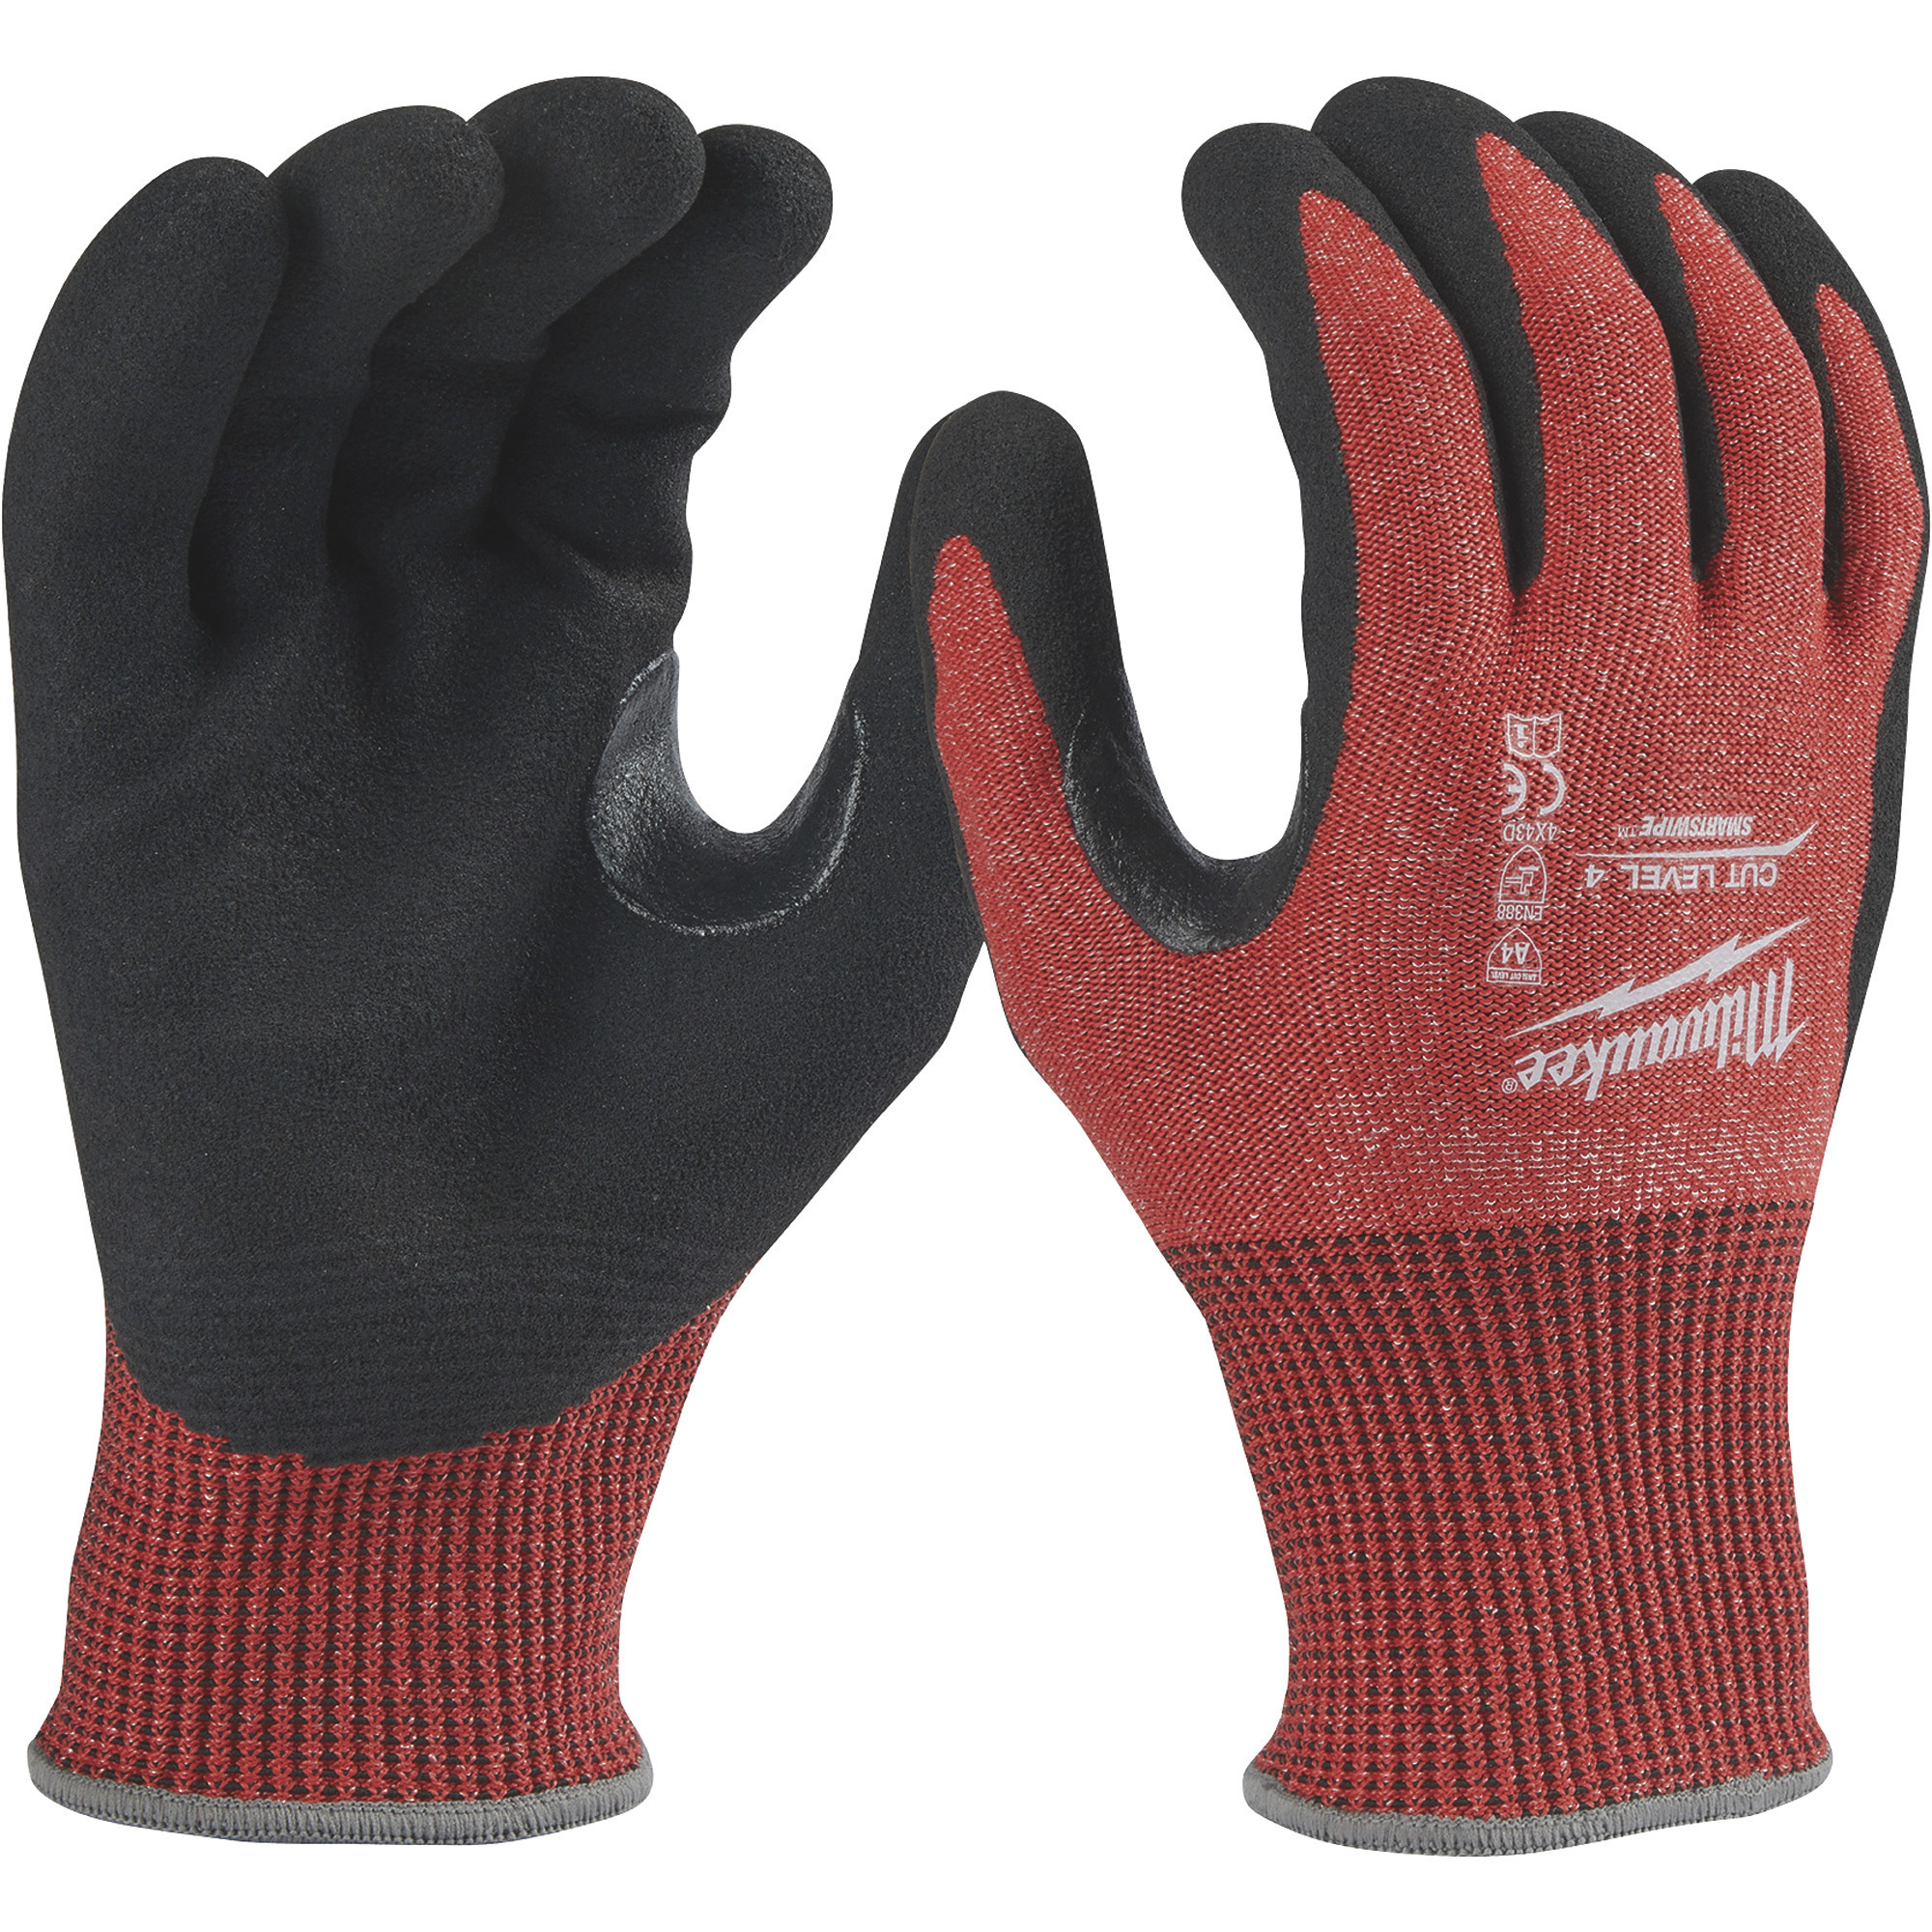 Milwaukee Cut-Resistant Level 4 Nitrile Dipped Gloves, 1 Pair, Red/Black, Large, Model 48-22-8947